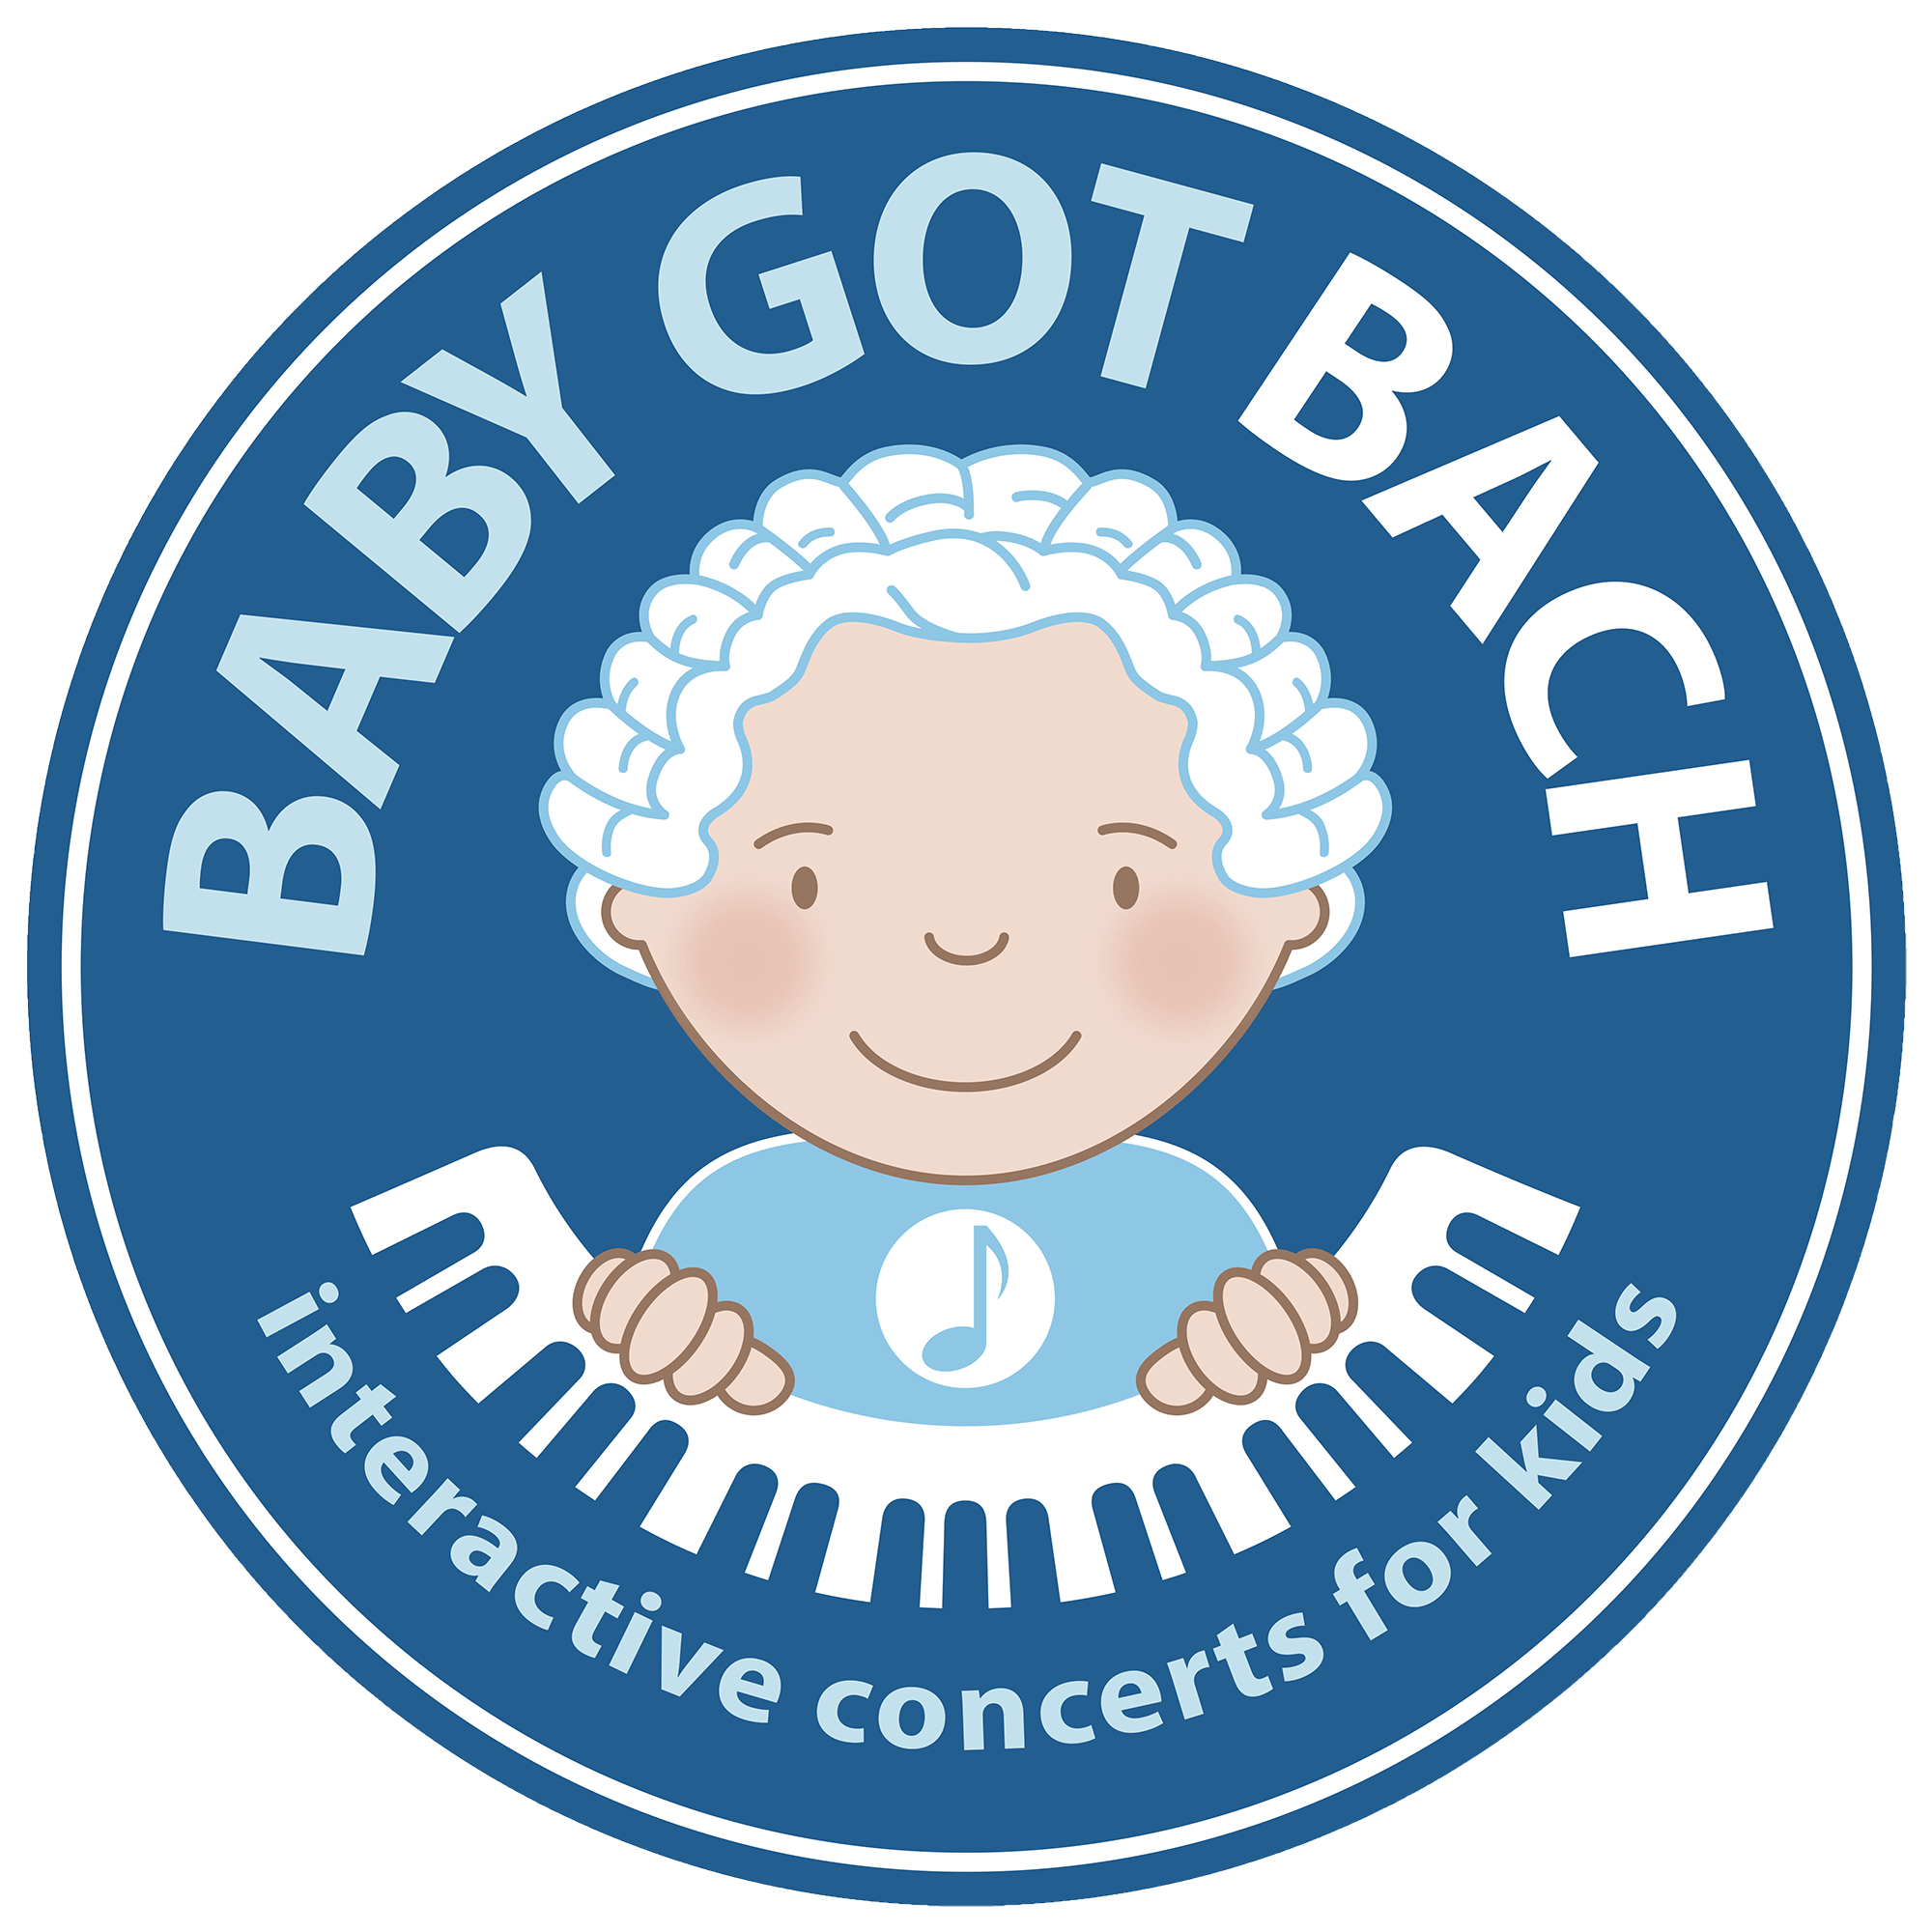 Baby in a World with Blue Logo - Baby Got Bach Concerts For Kids Ages 3 6